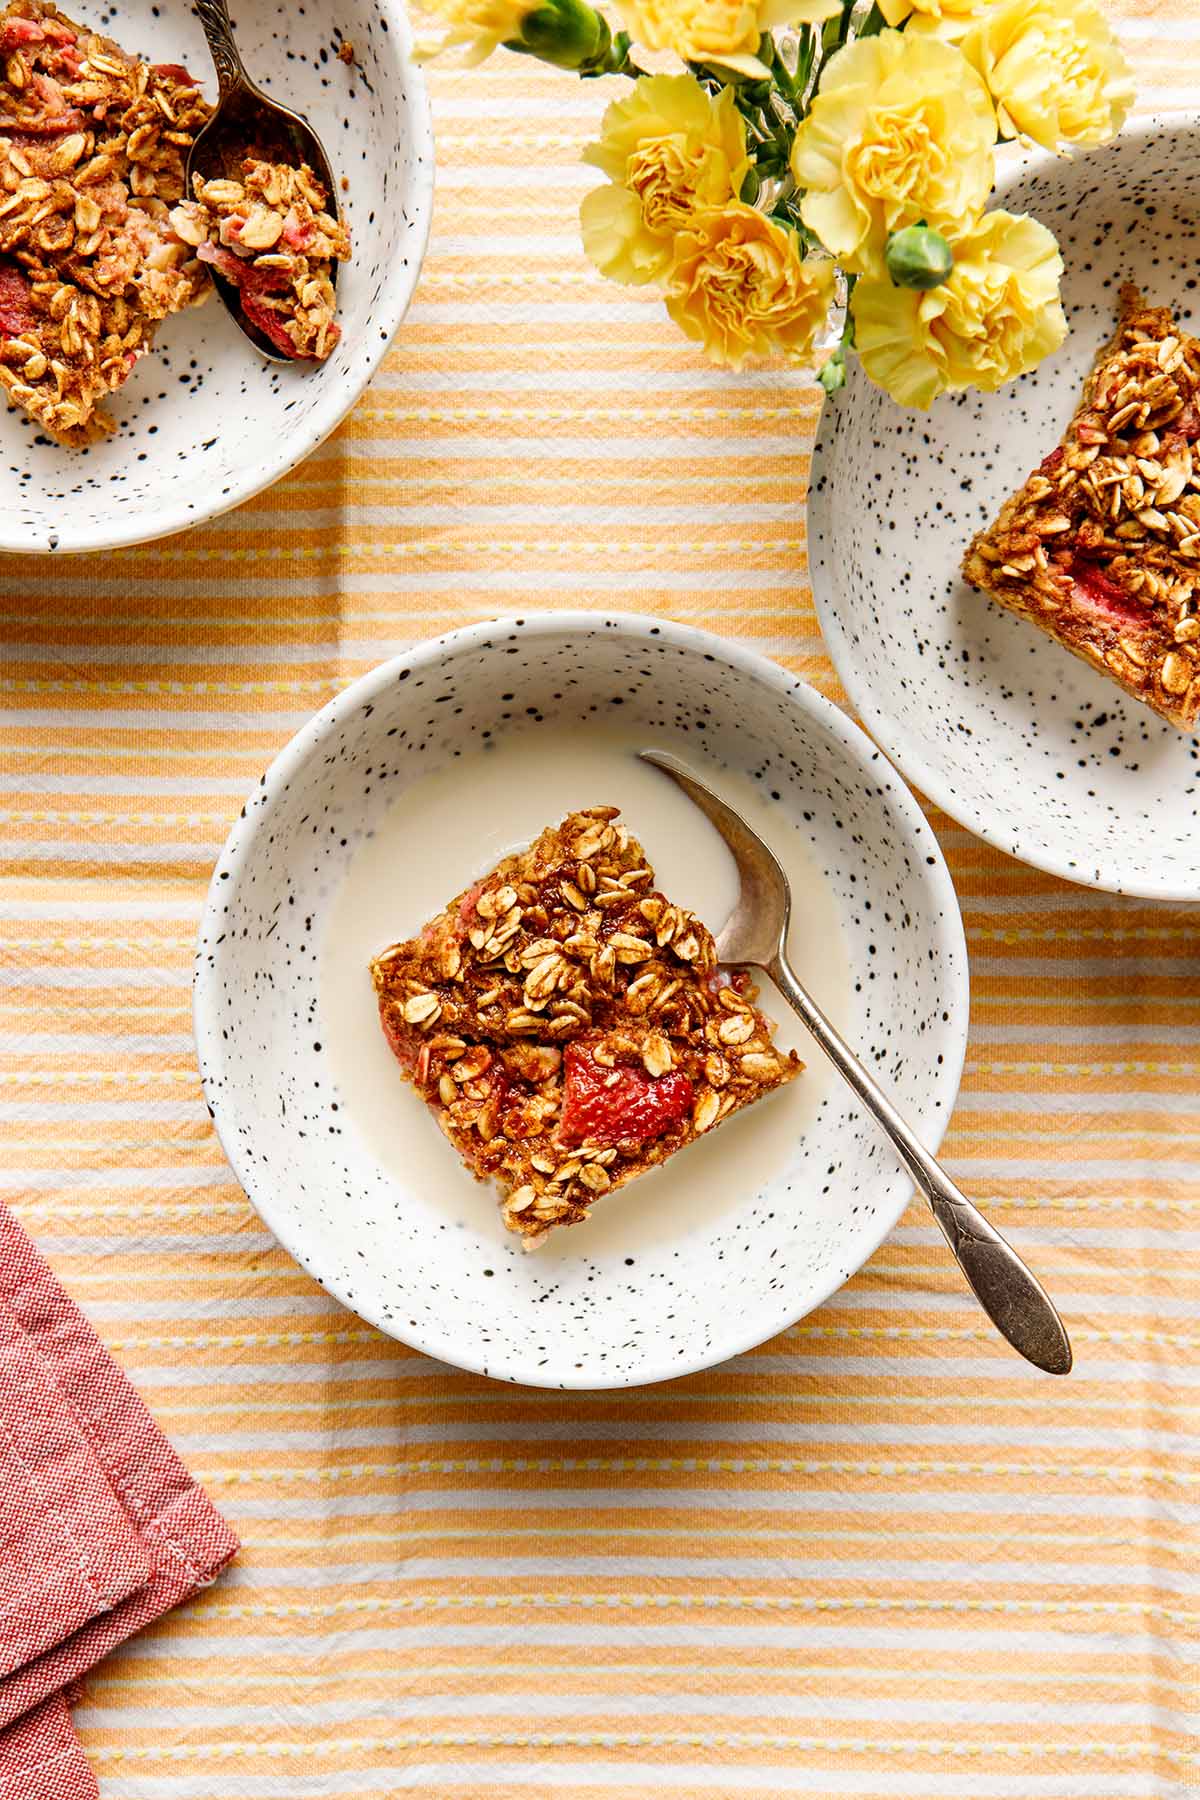 Servings of vegan strawberry baked oatmeal, topped with plant-based milk and maple syrup, in bowls on a table with a striped orange tablecloth.